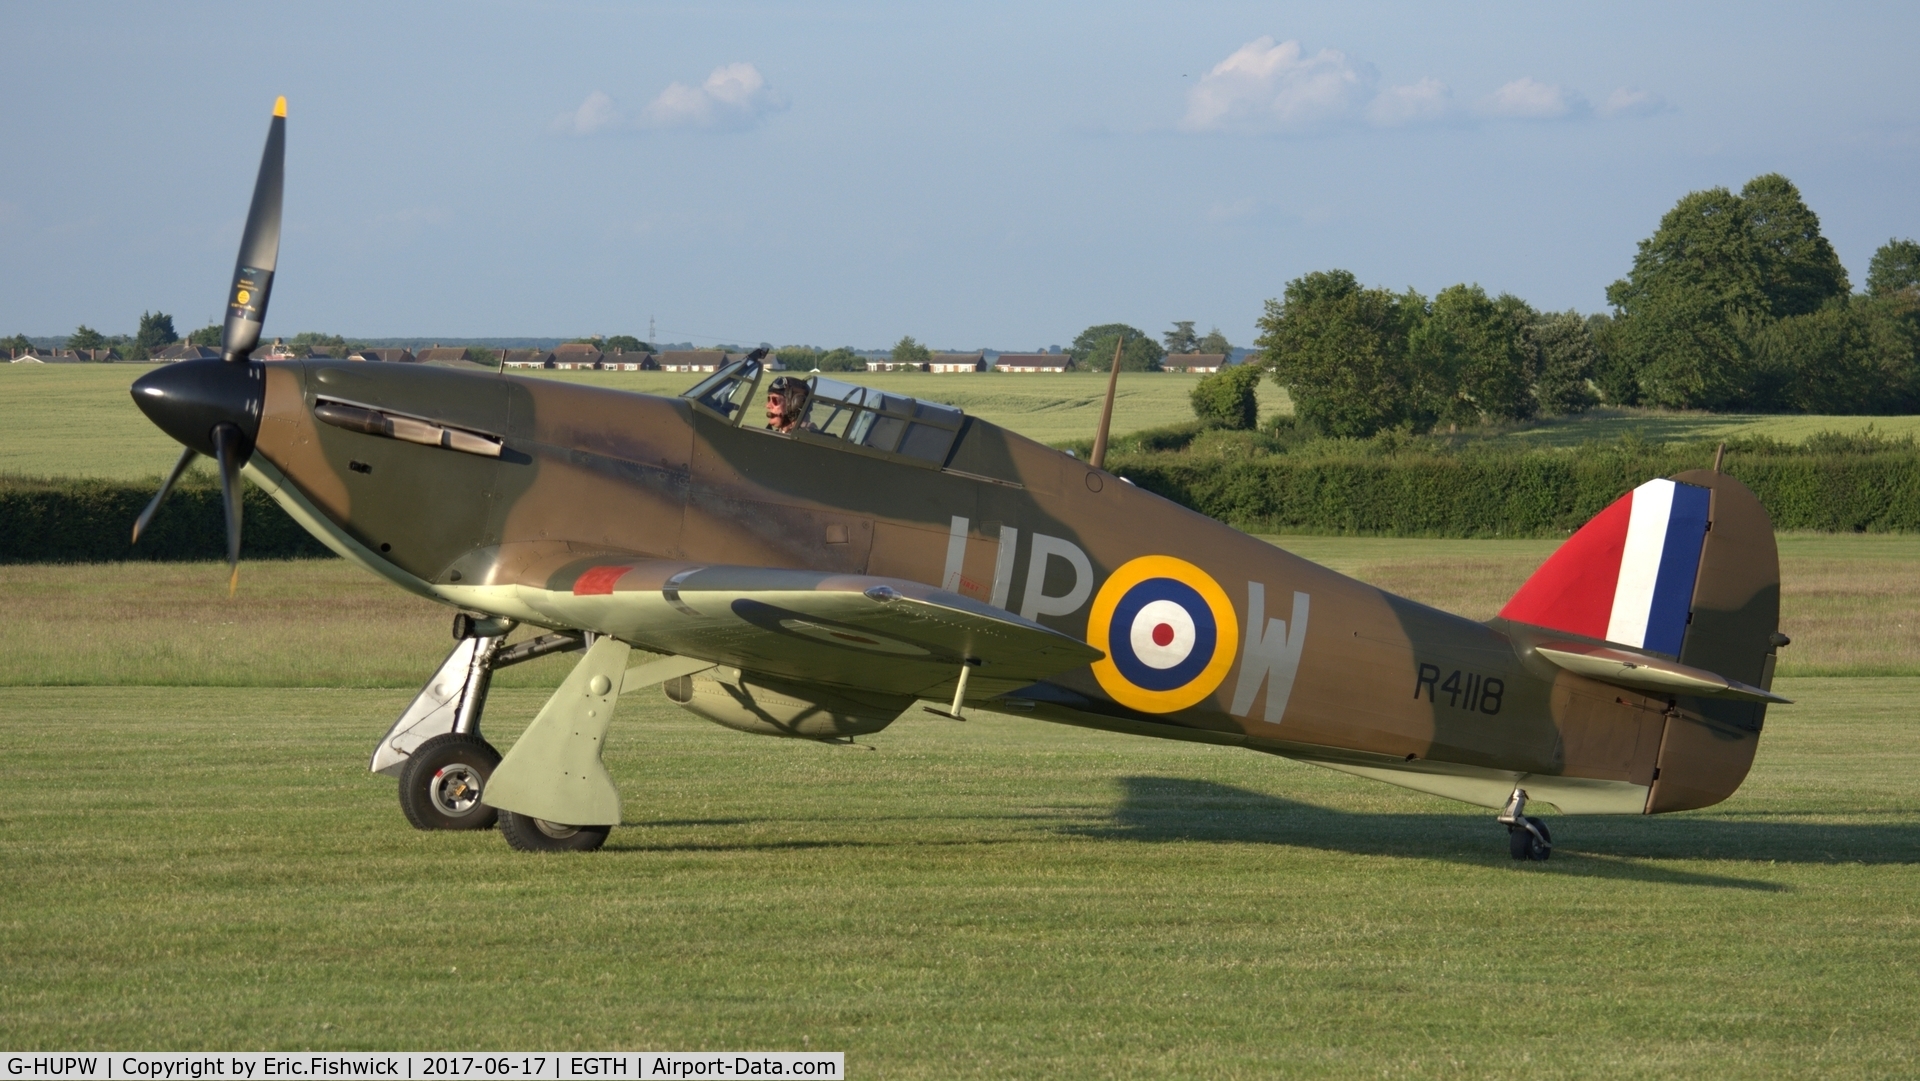 G-HUPW, 1940 Hawker Hurricane I C/N G592301, 1. R4118 at the epic Evening Airshow, The Shuttleworth Collection, June, 2017